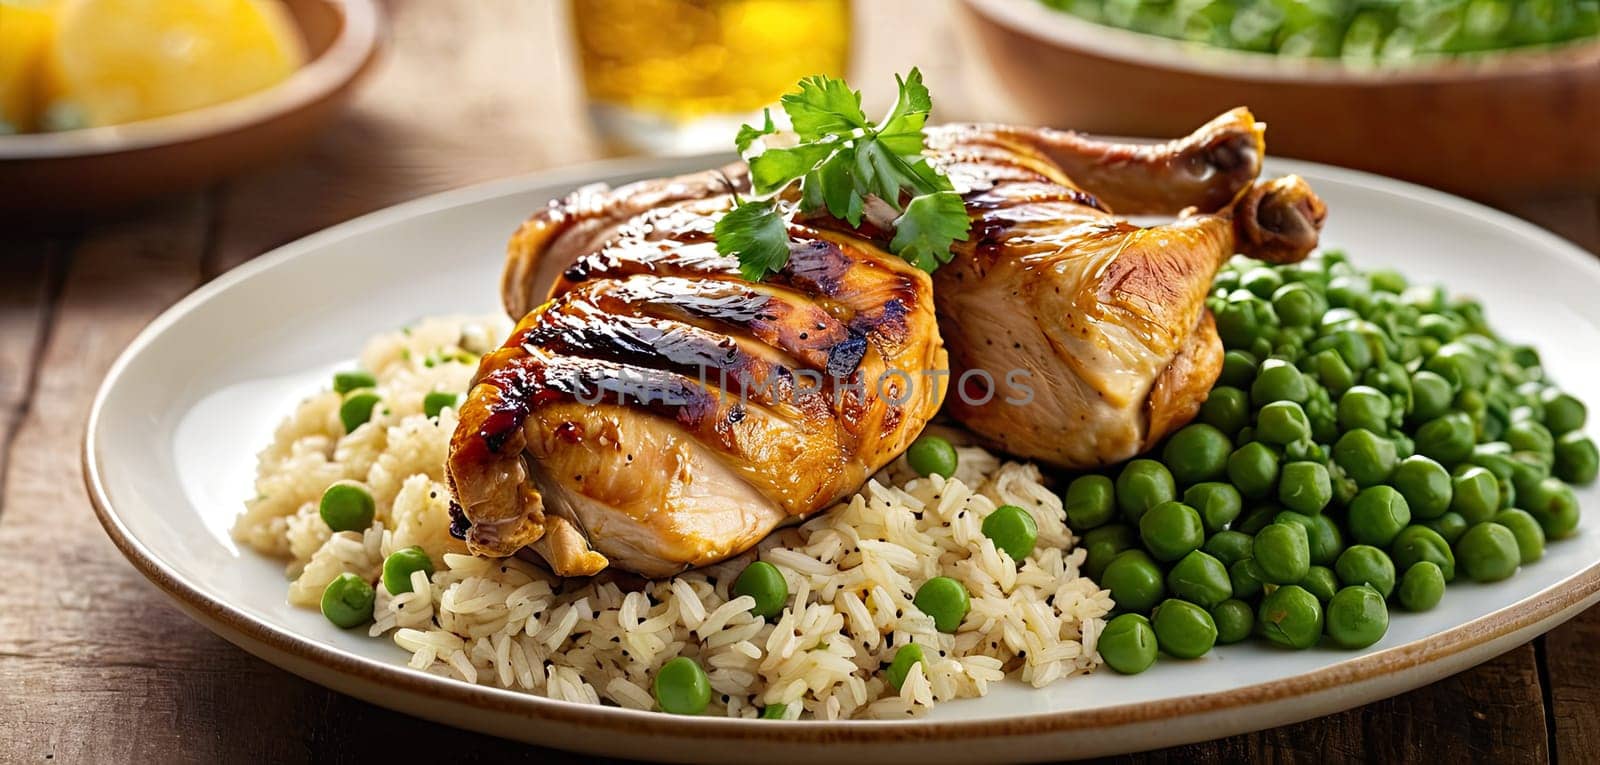 Grilled chicken, with rice and green peas served on plate, wooden rustic table background. Close-up view, grilled chicken thigh with grill marks, surrounded by rice and green peas in blue dish